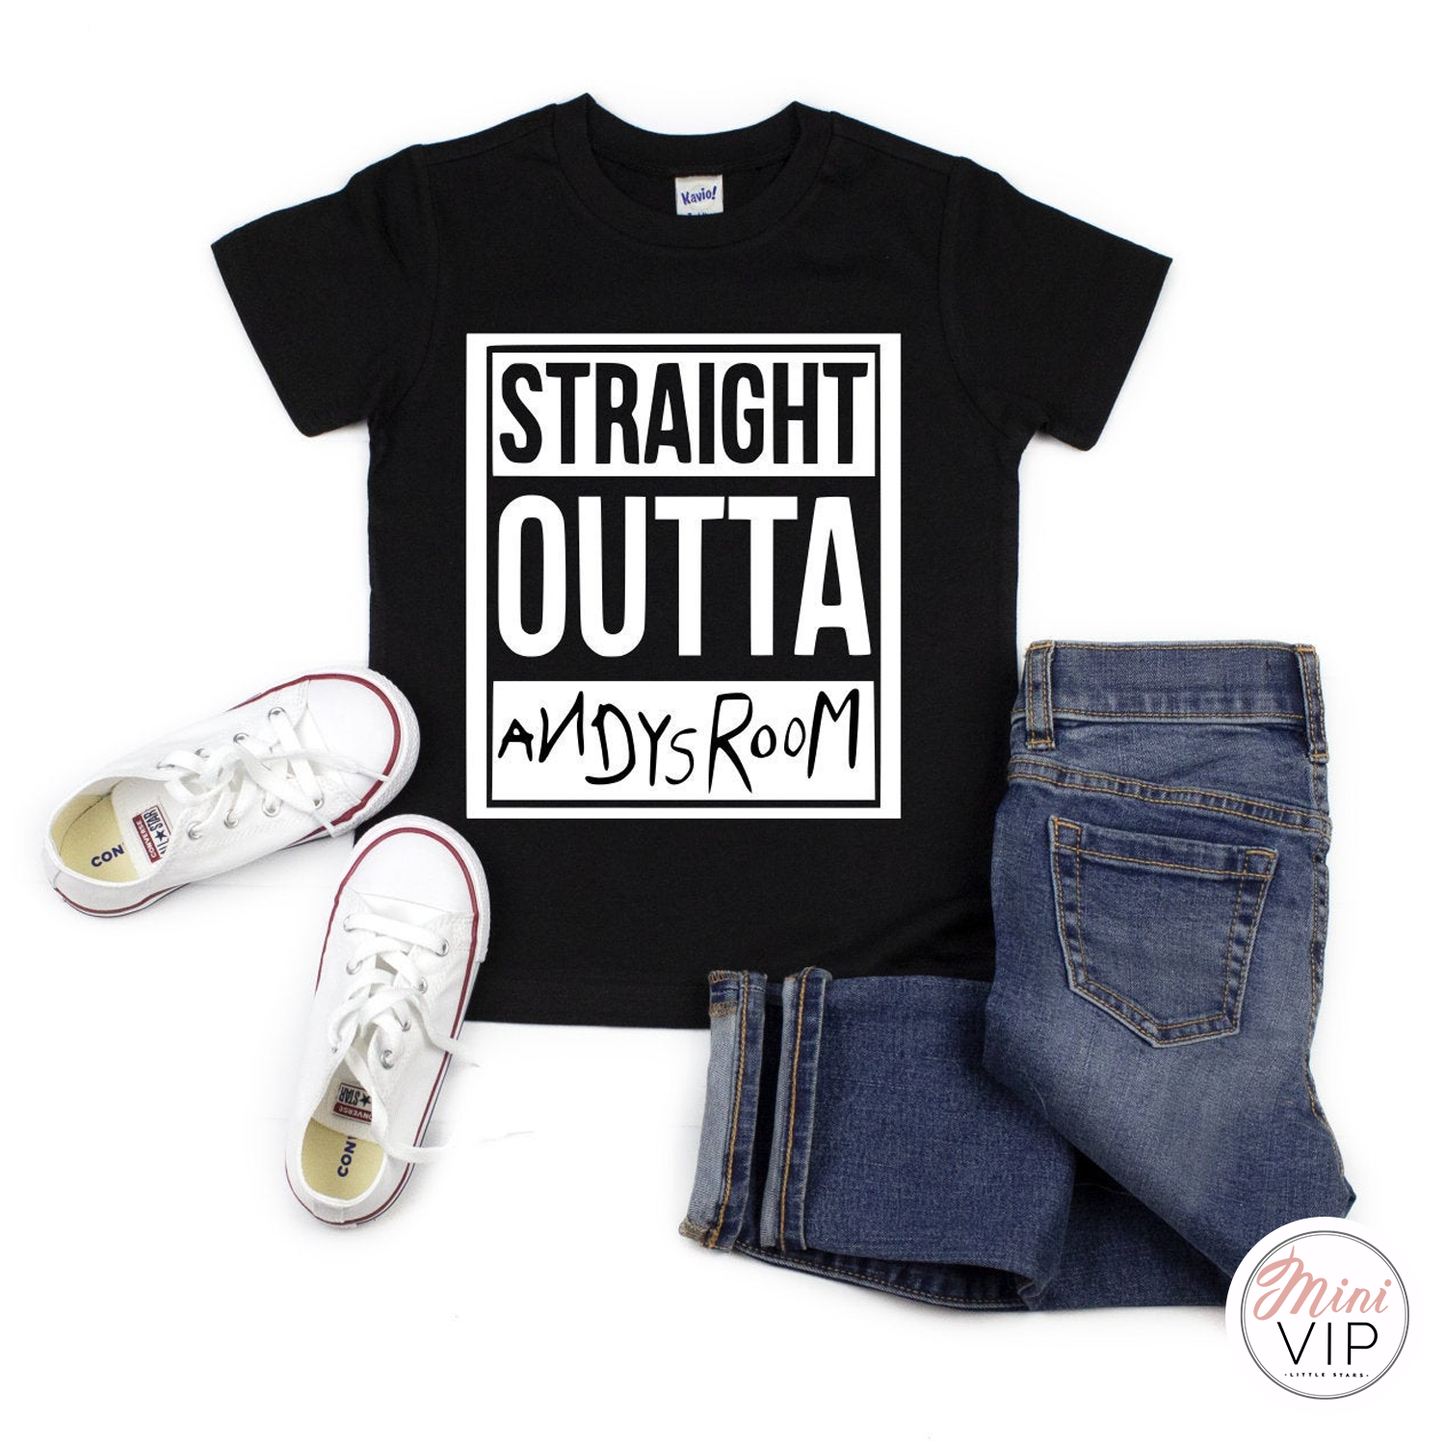 Straight Outta Andy's Room Black t-shirt